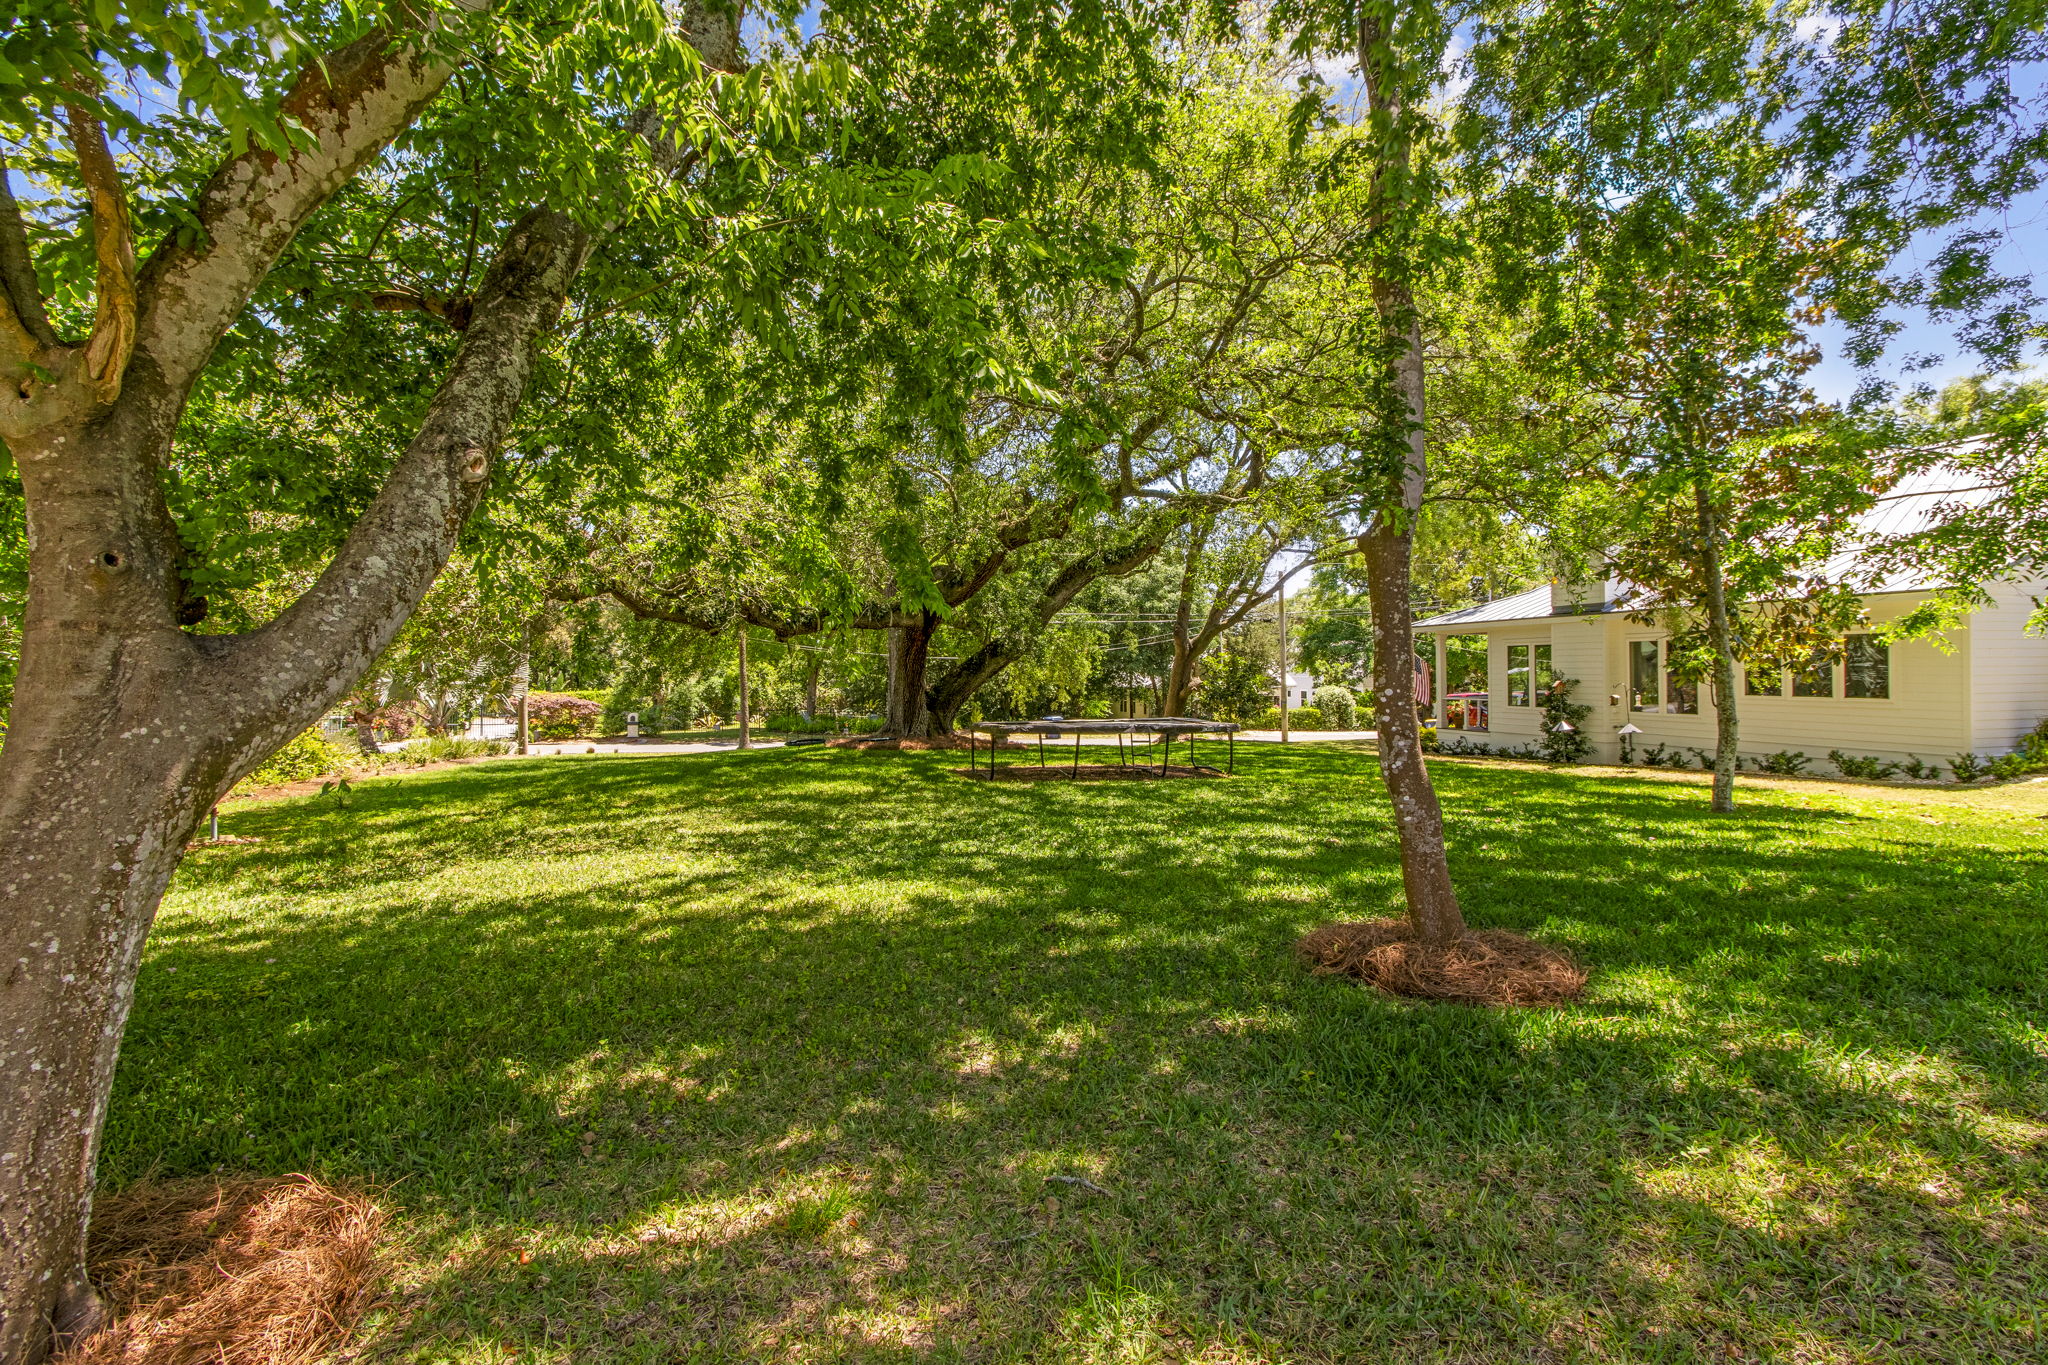 The back yard features a magnificent live oak tree, a fun spot for a shady tree swing